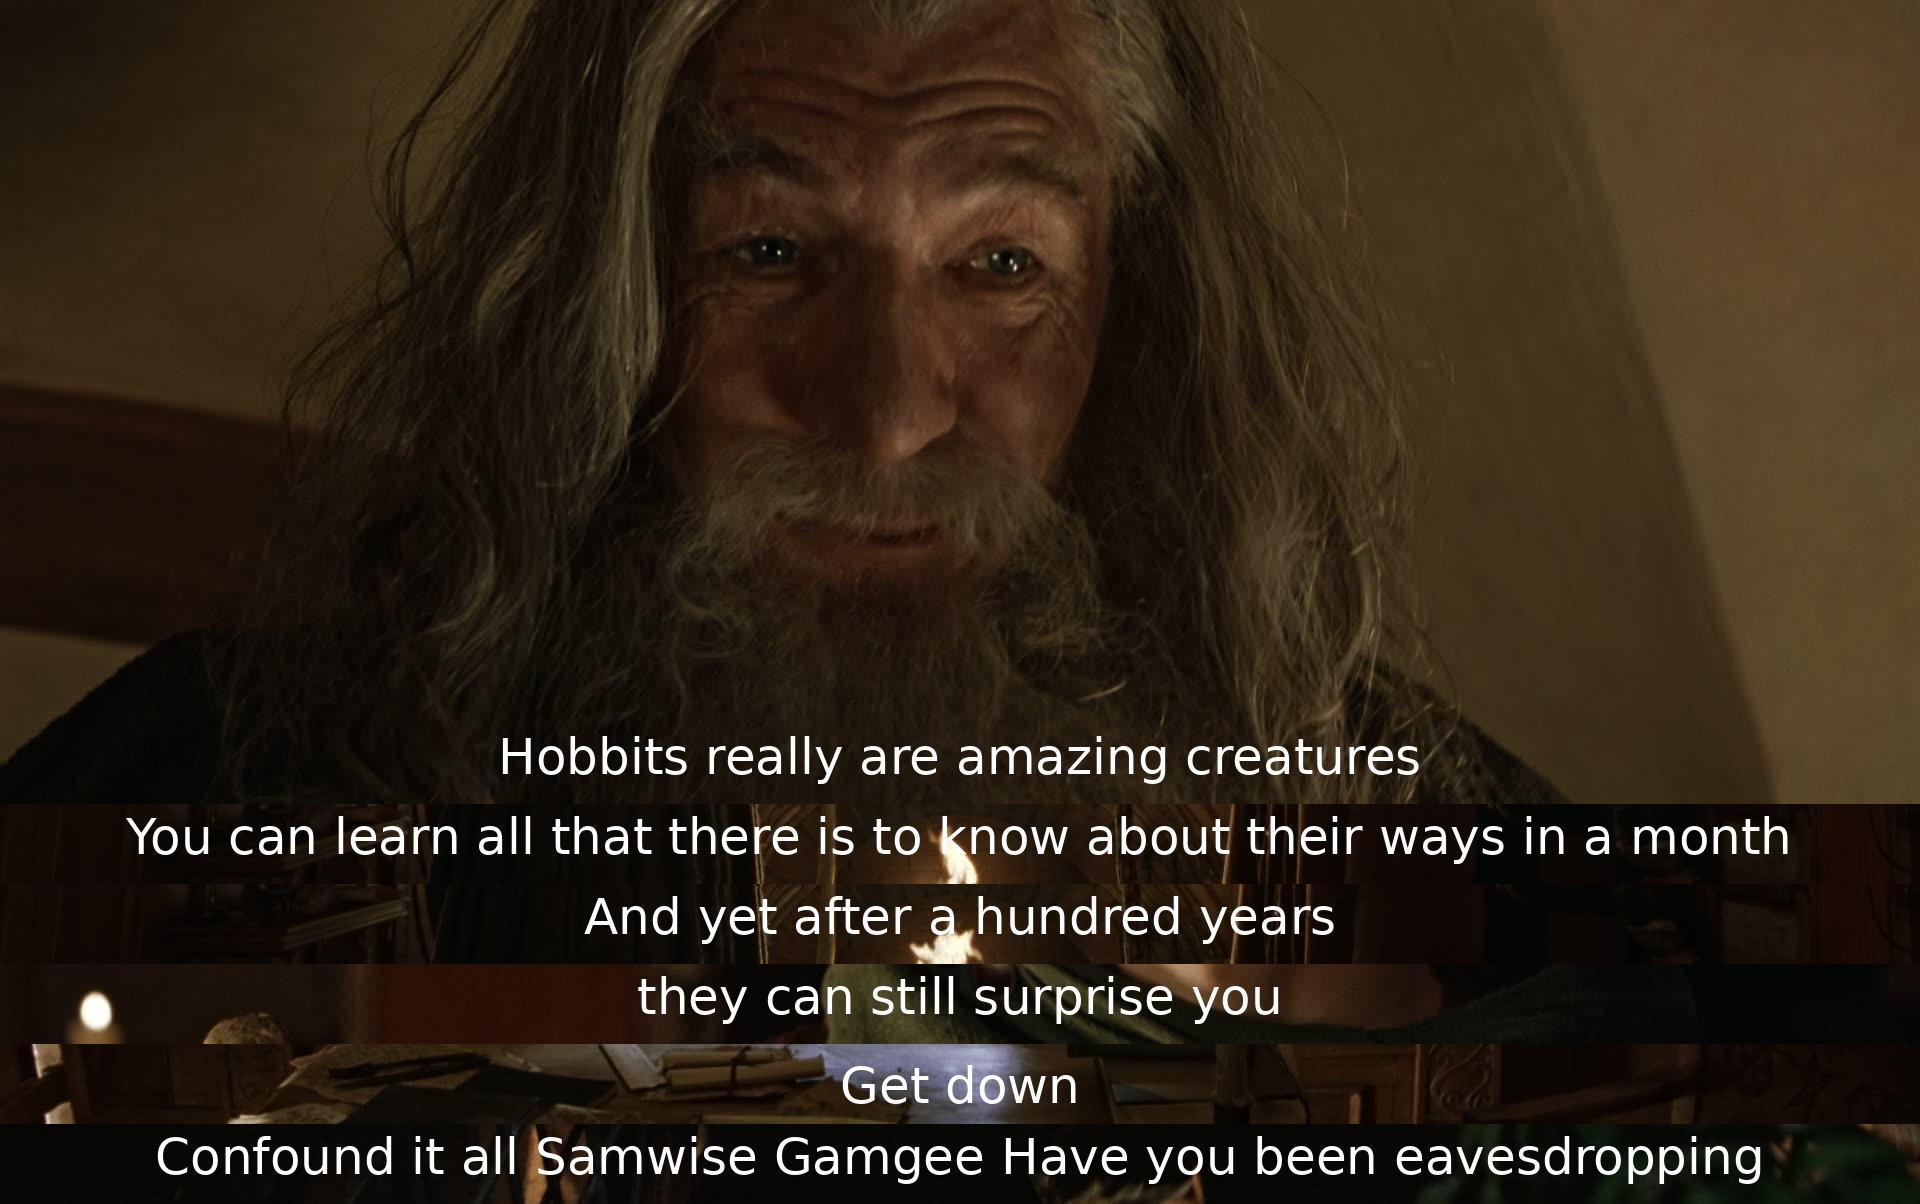 One character admires hobbits' amazing qualities, praising their ability to surprise even after a hundred years of knowing them. Another character catches Samwise eavesdropping and playfully expresses frustration.